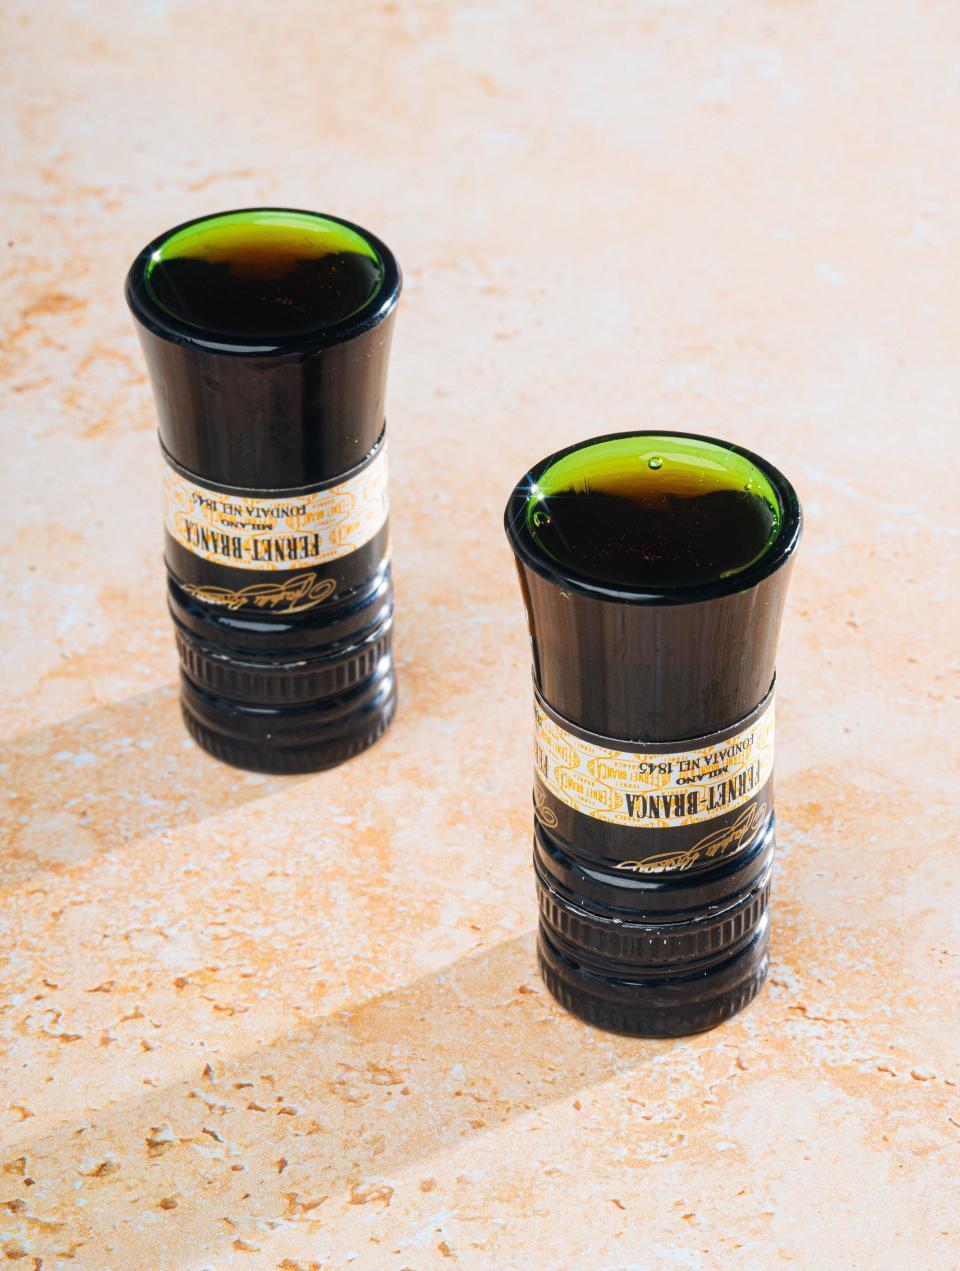 Fernet Branca and the Fernet Menta are combined to create the “bartender’s handshake.”  It is served in shot glasses sustainably made from the tops of old bottles at the Woodside Bistro at the historic, renovated Woodside Mill in West Greenville.